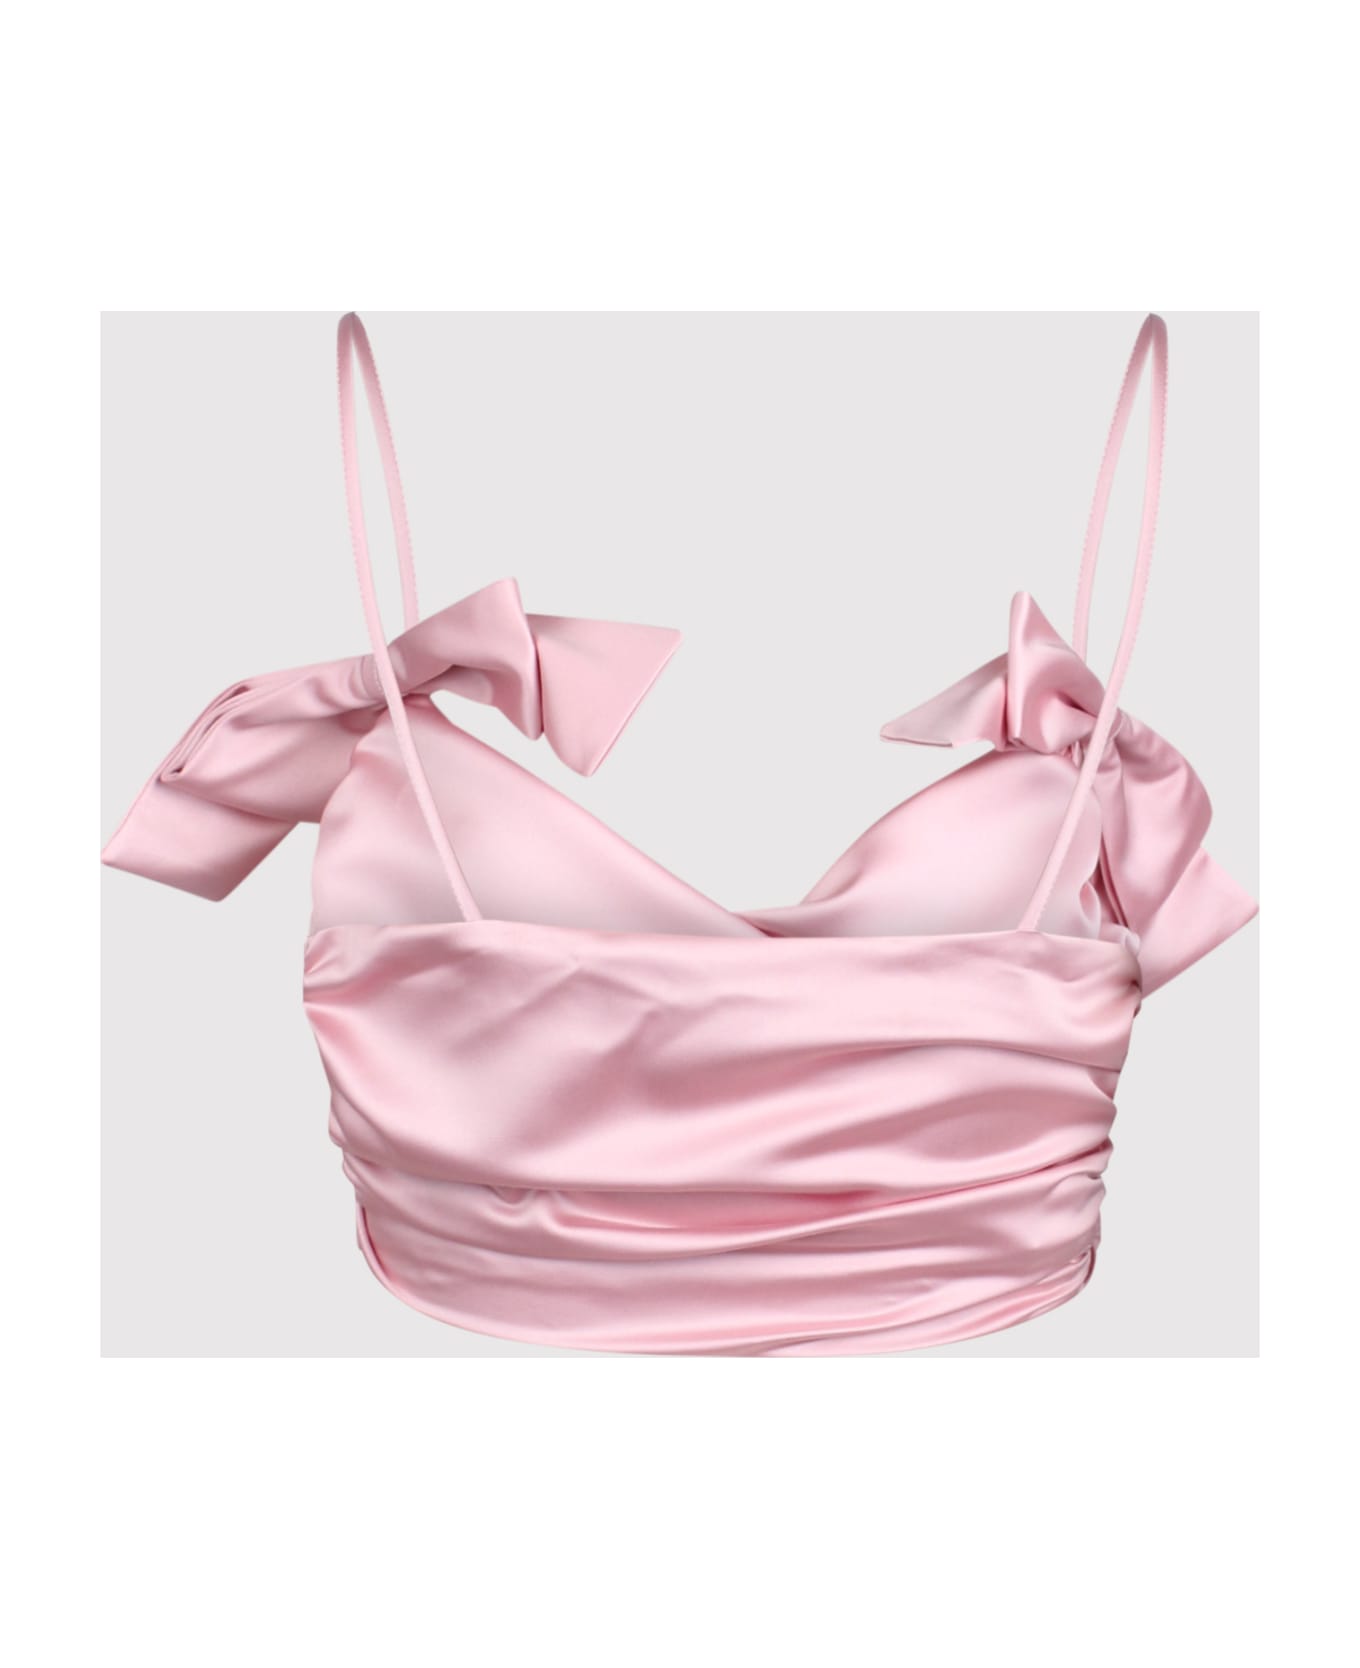 Fiorucci Satin Effect Top With Bows キャミソール